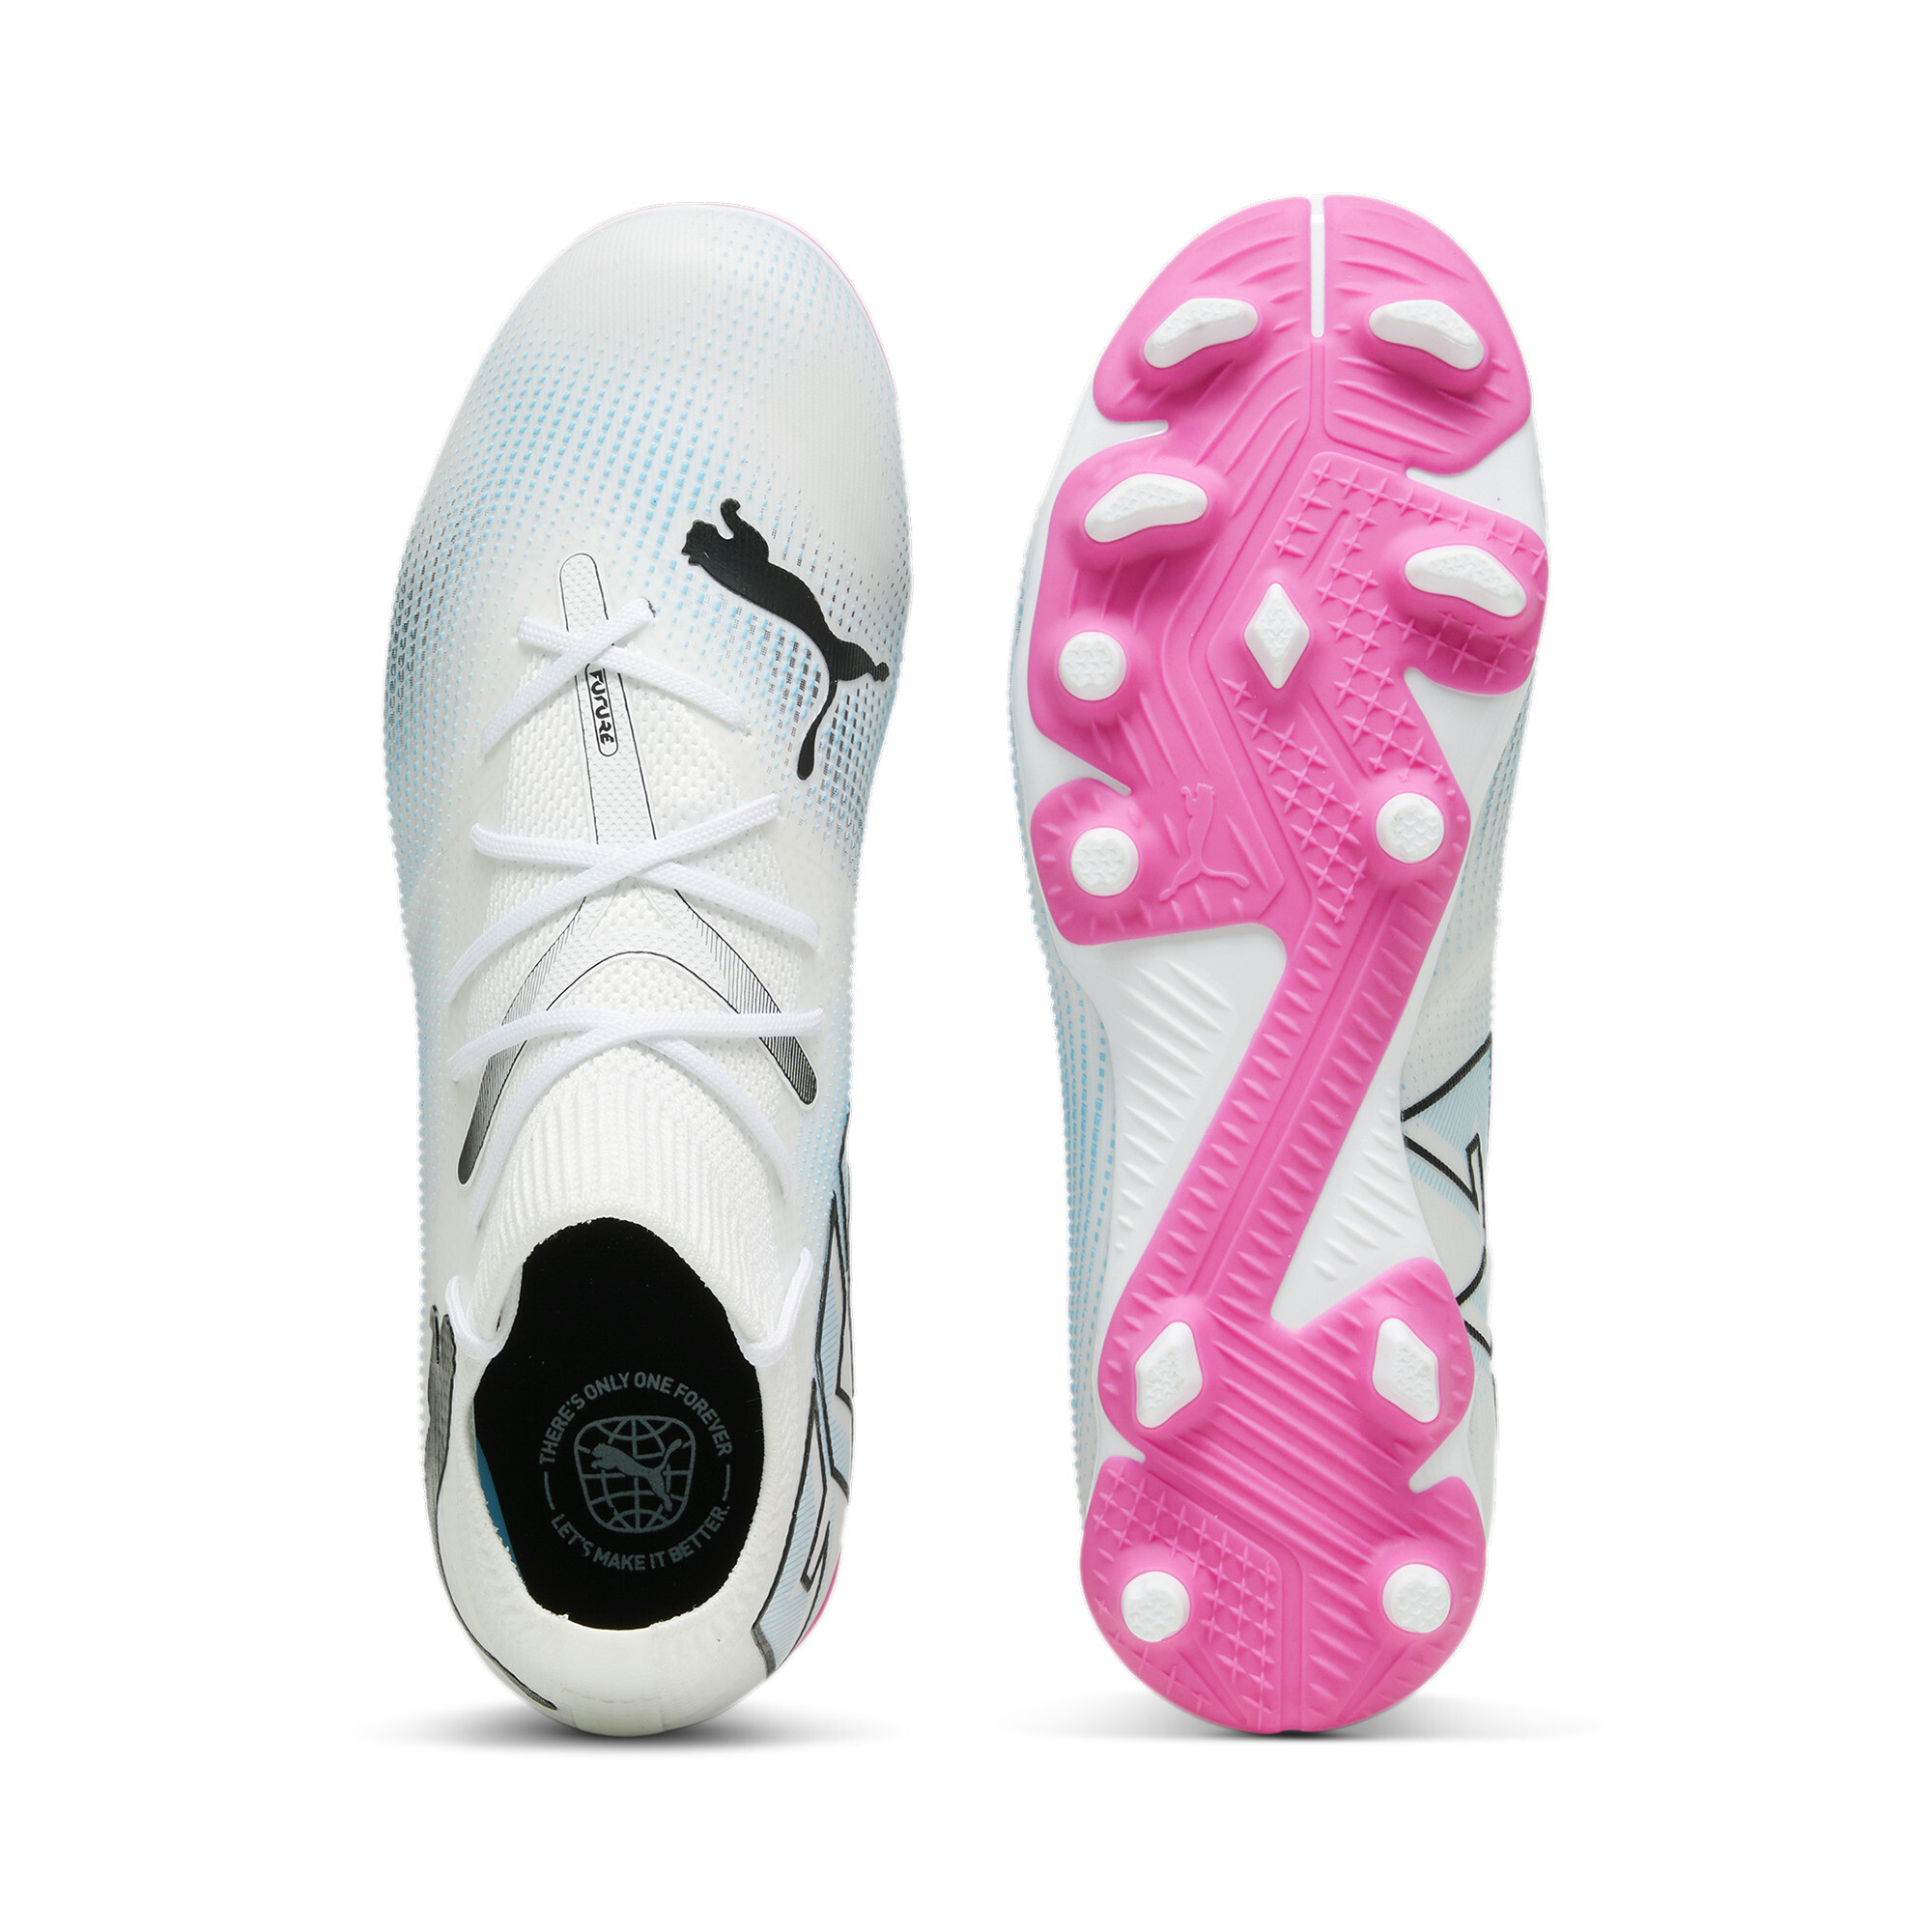 PUMA FUTURE 7 MATCH FG/AG Youth Football Boots In White/Pink, Size EU 38